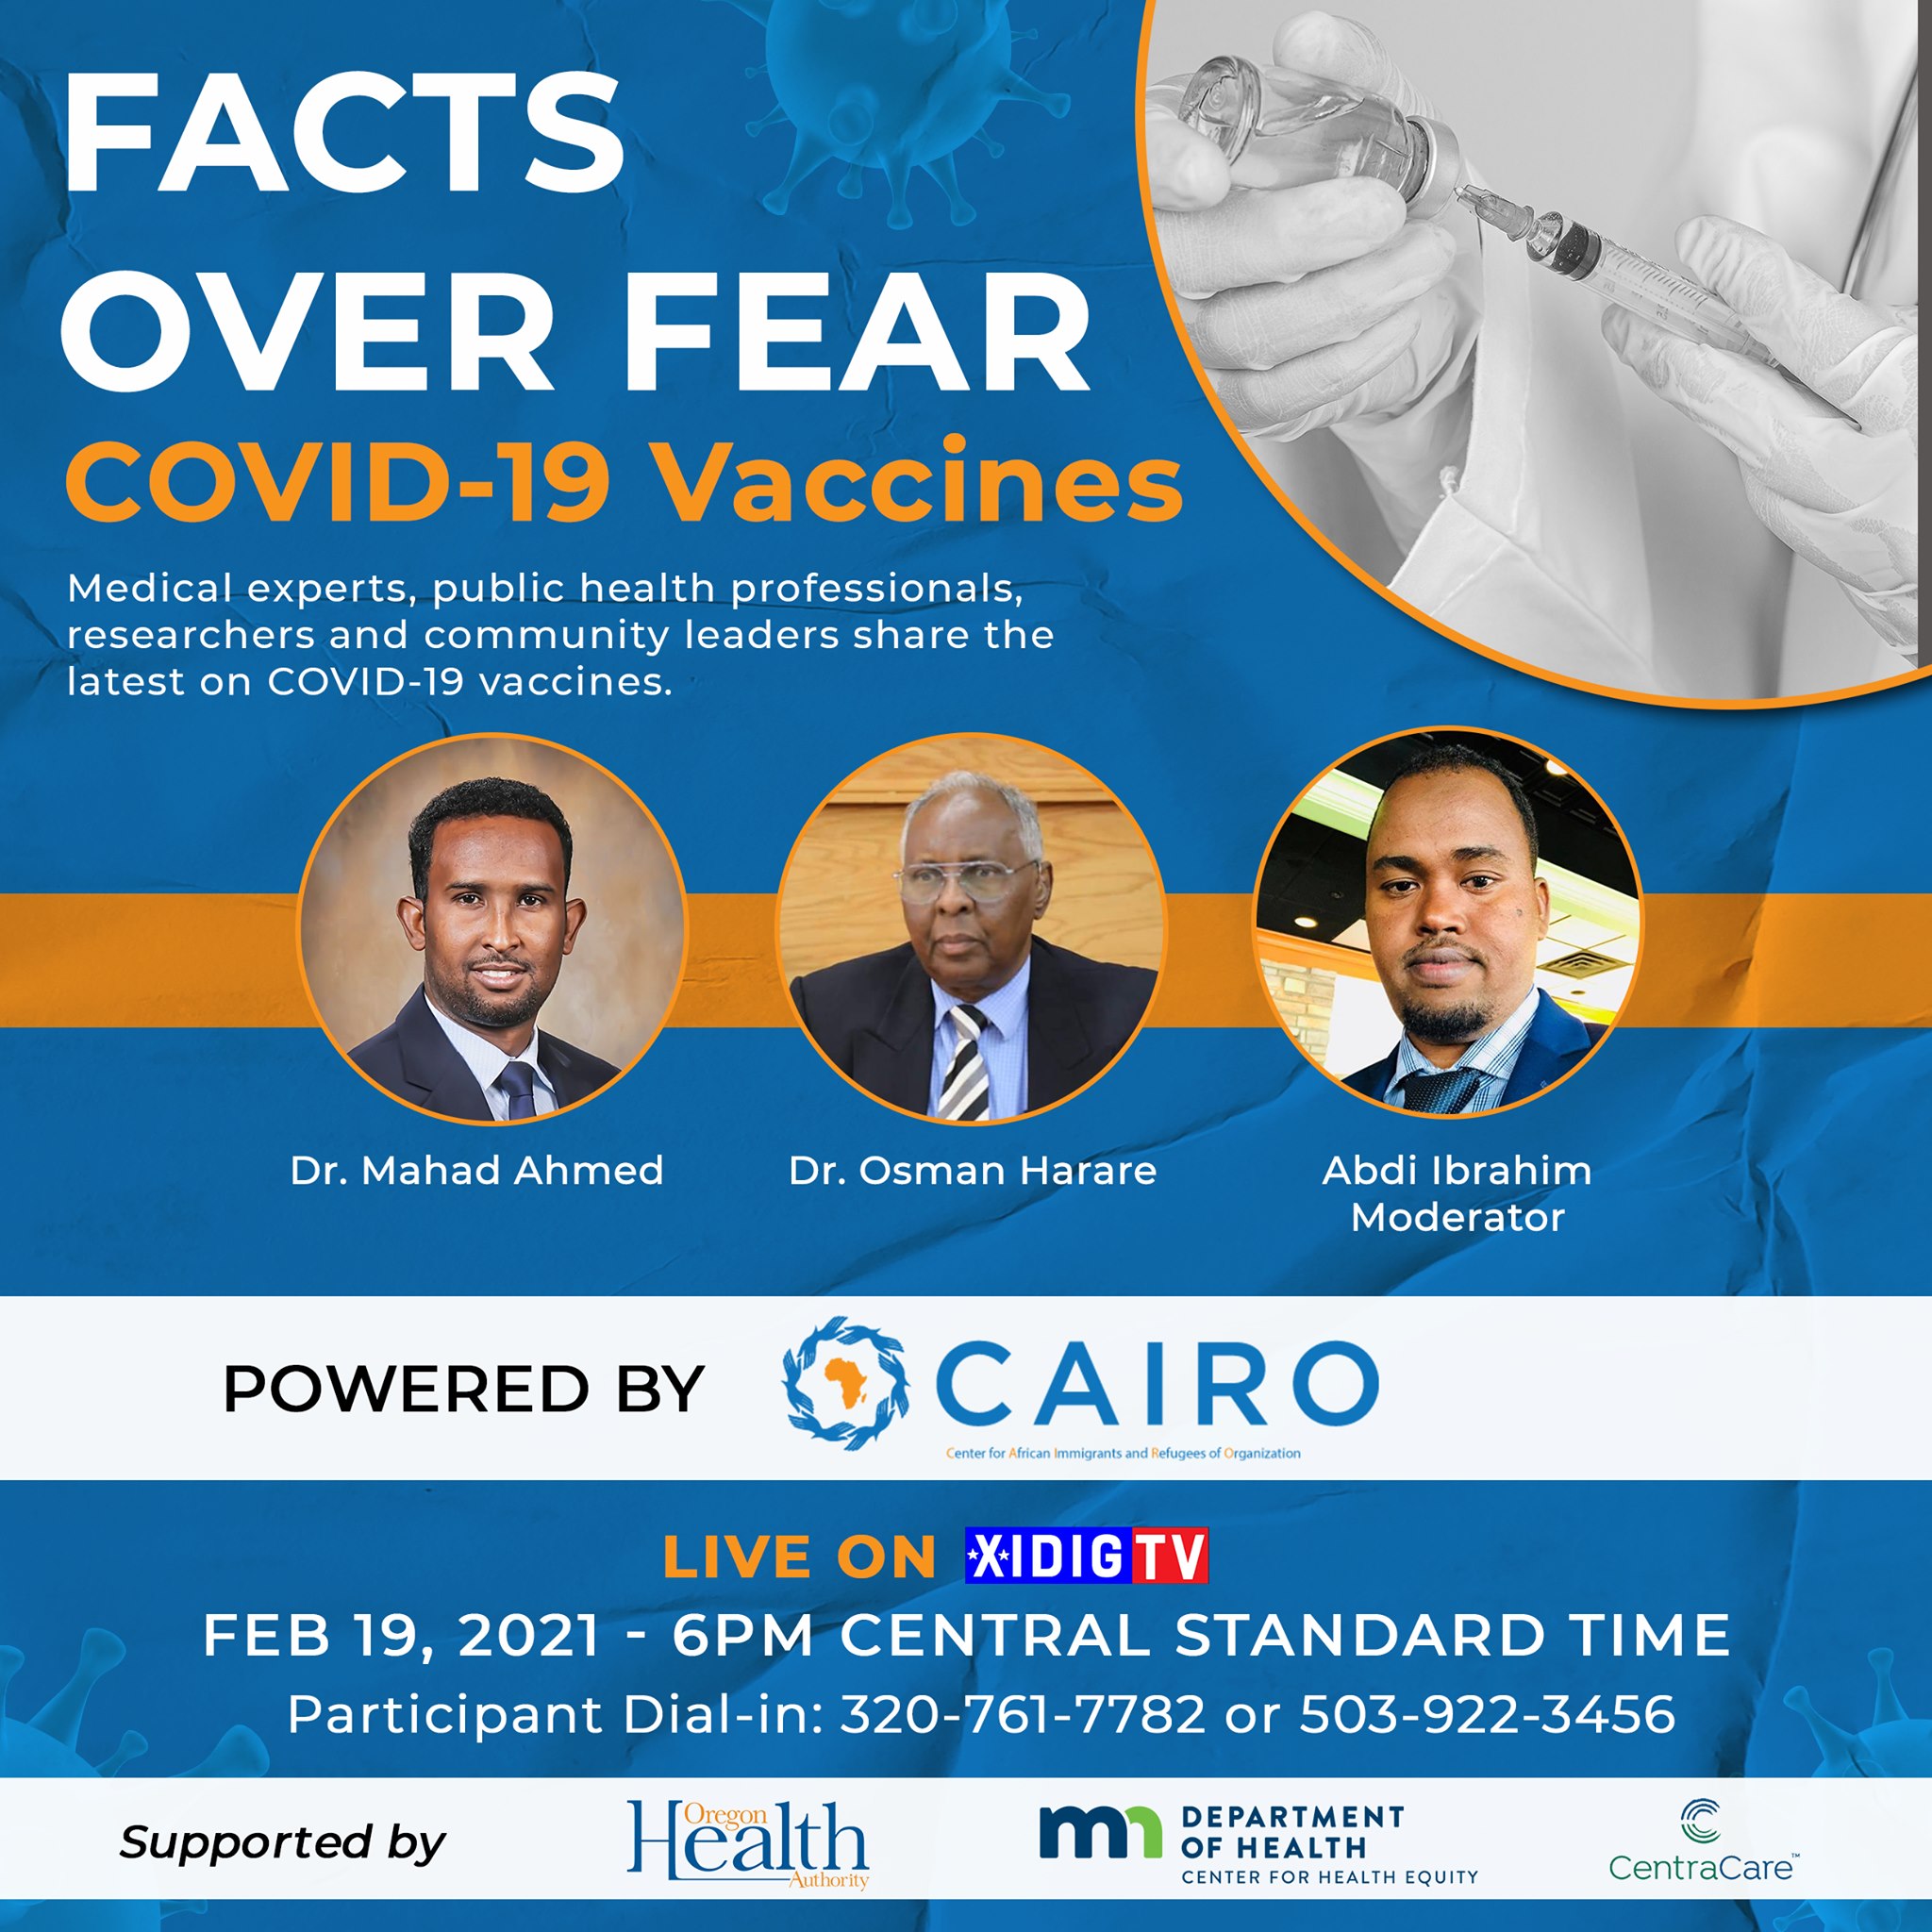 FACTS over FEAR: COVID-19 Vaccines